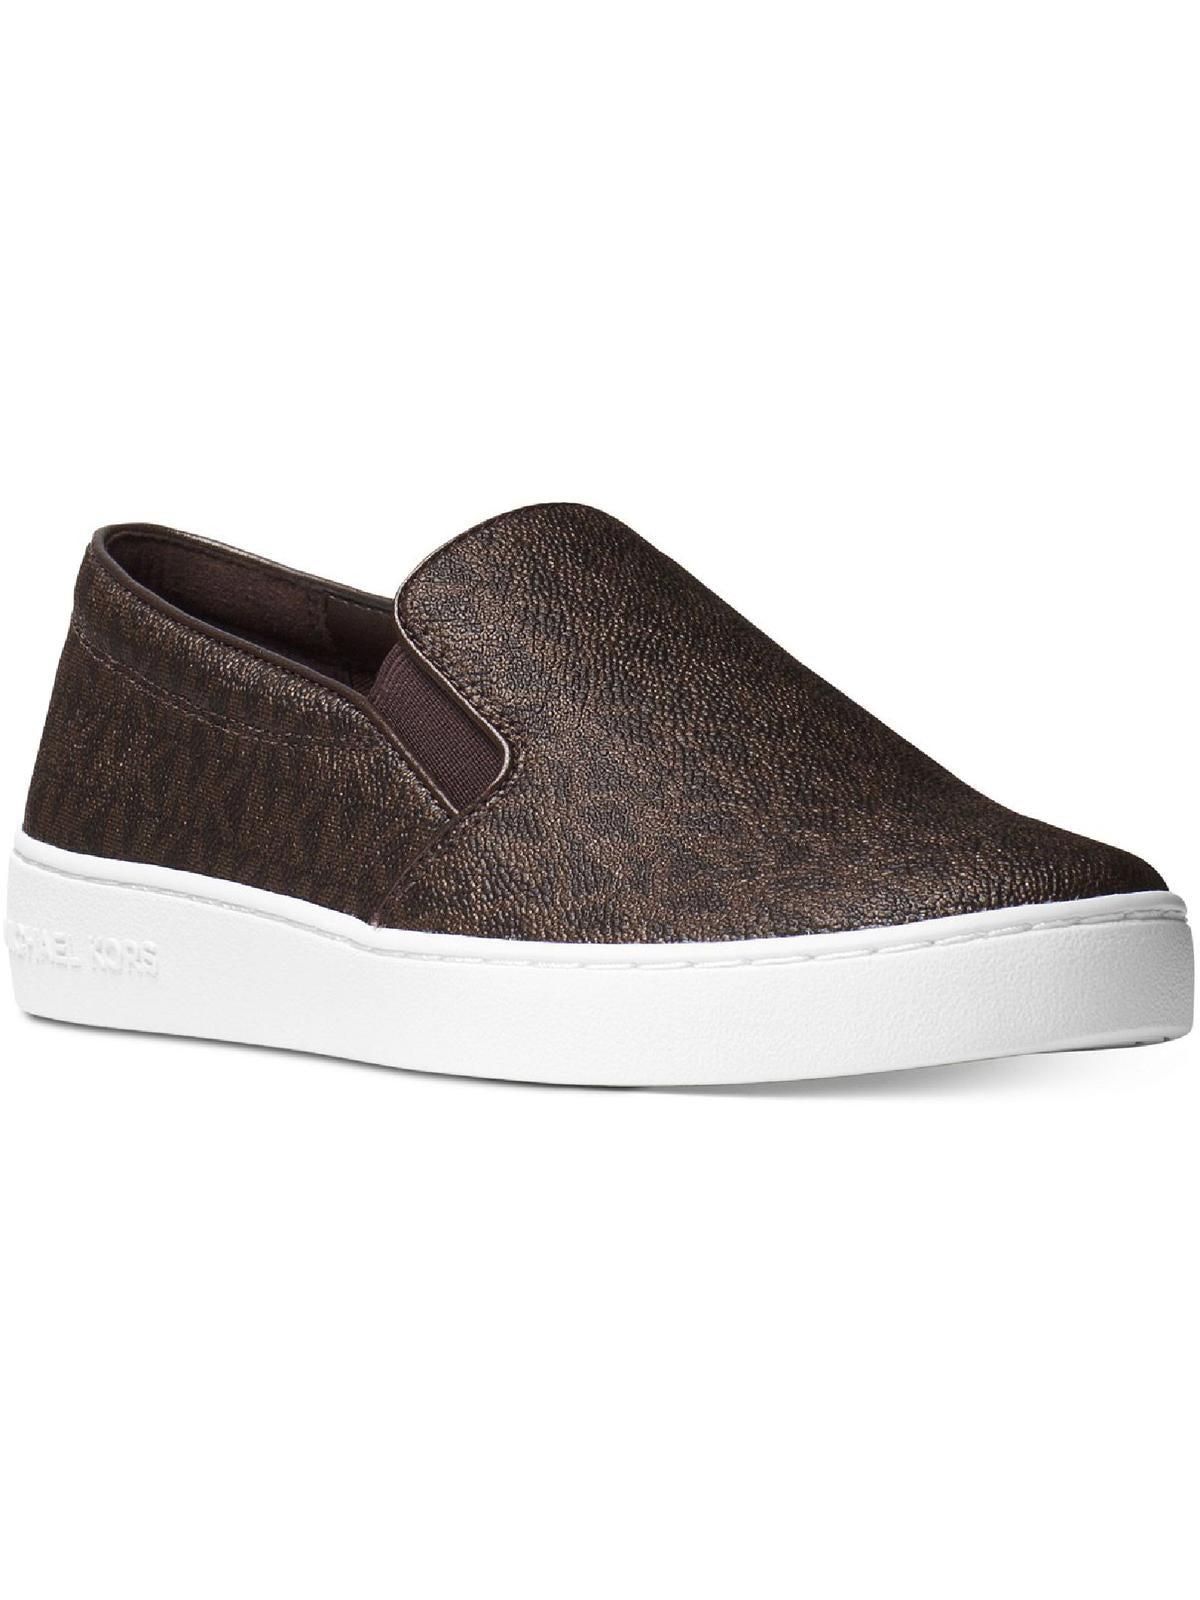 MICHAEL Michael Kors Keaton Slip On Faux Leather Slip On Casual And Fashion  Sneakers in Brown | Lyst